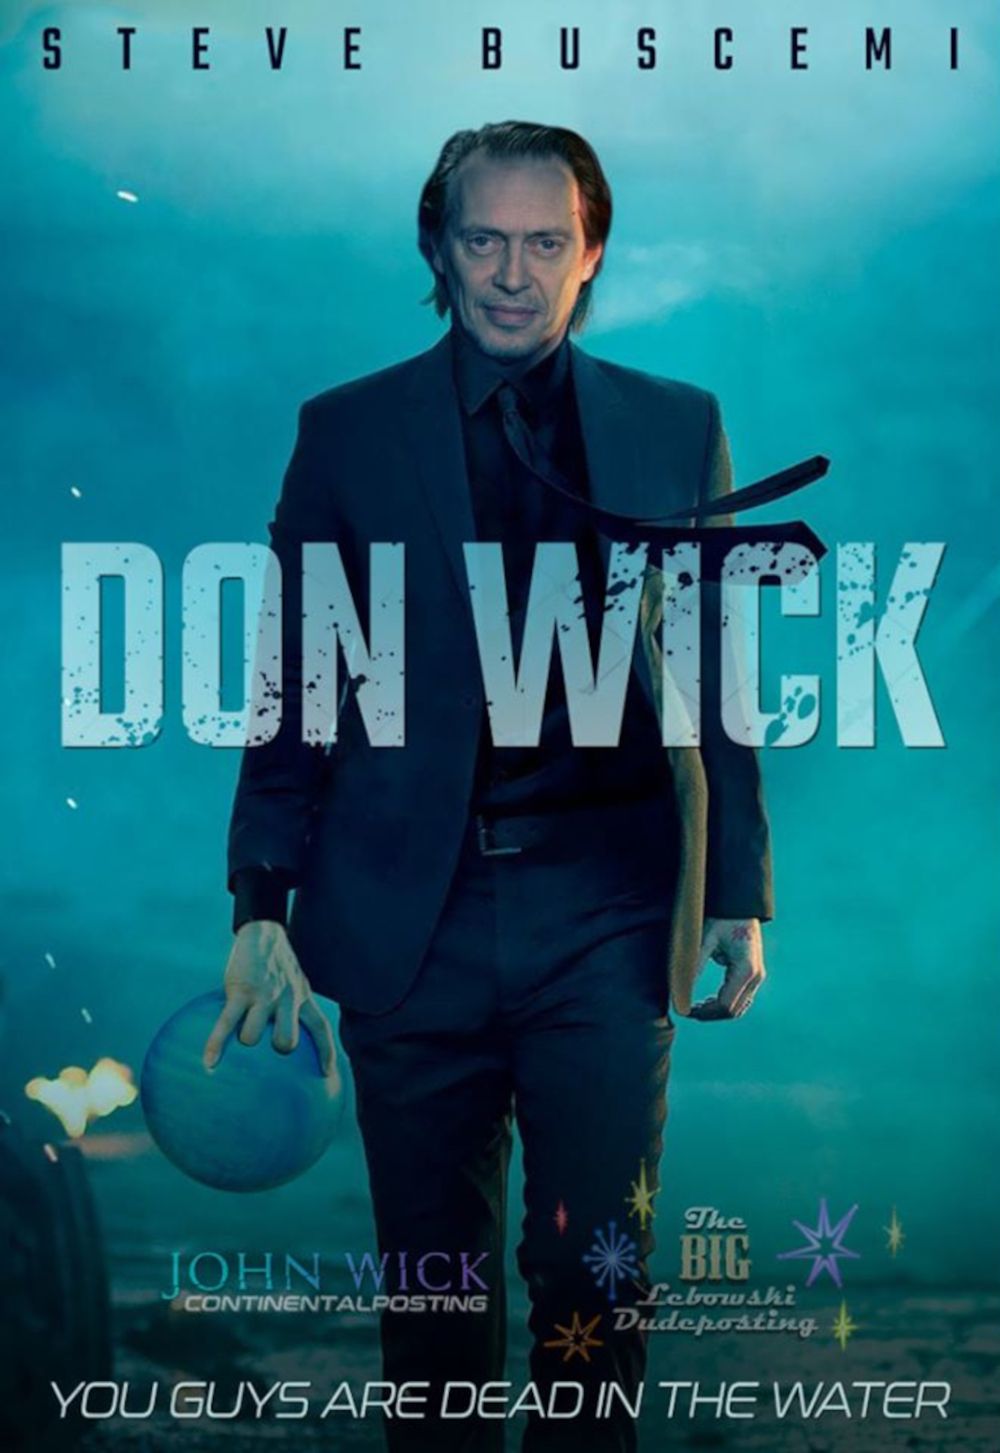 Donnie from The Big Lebowski as John Wick